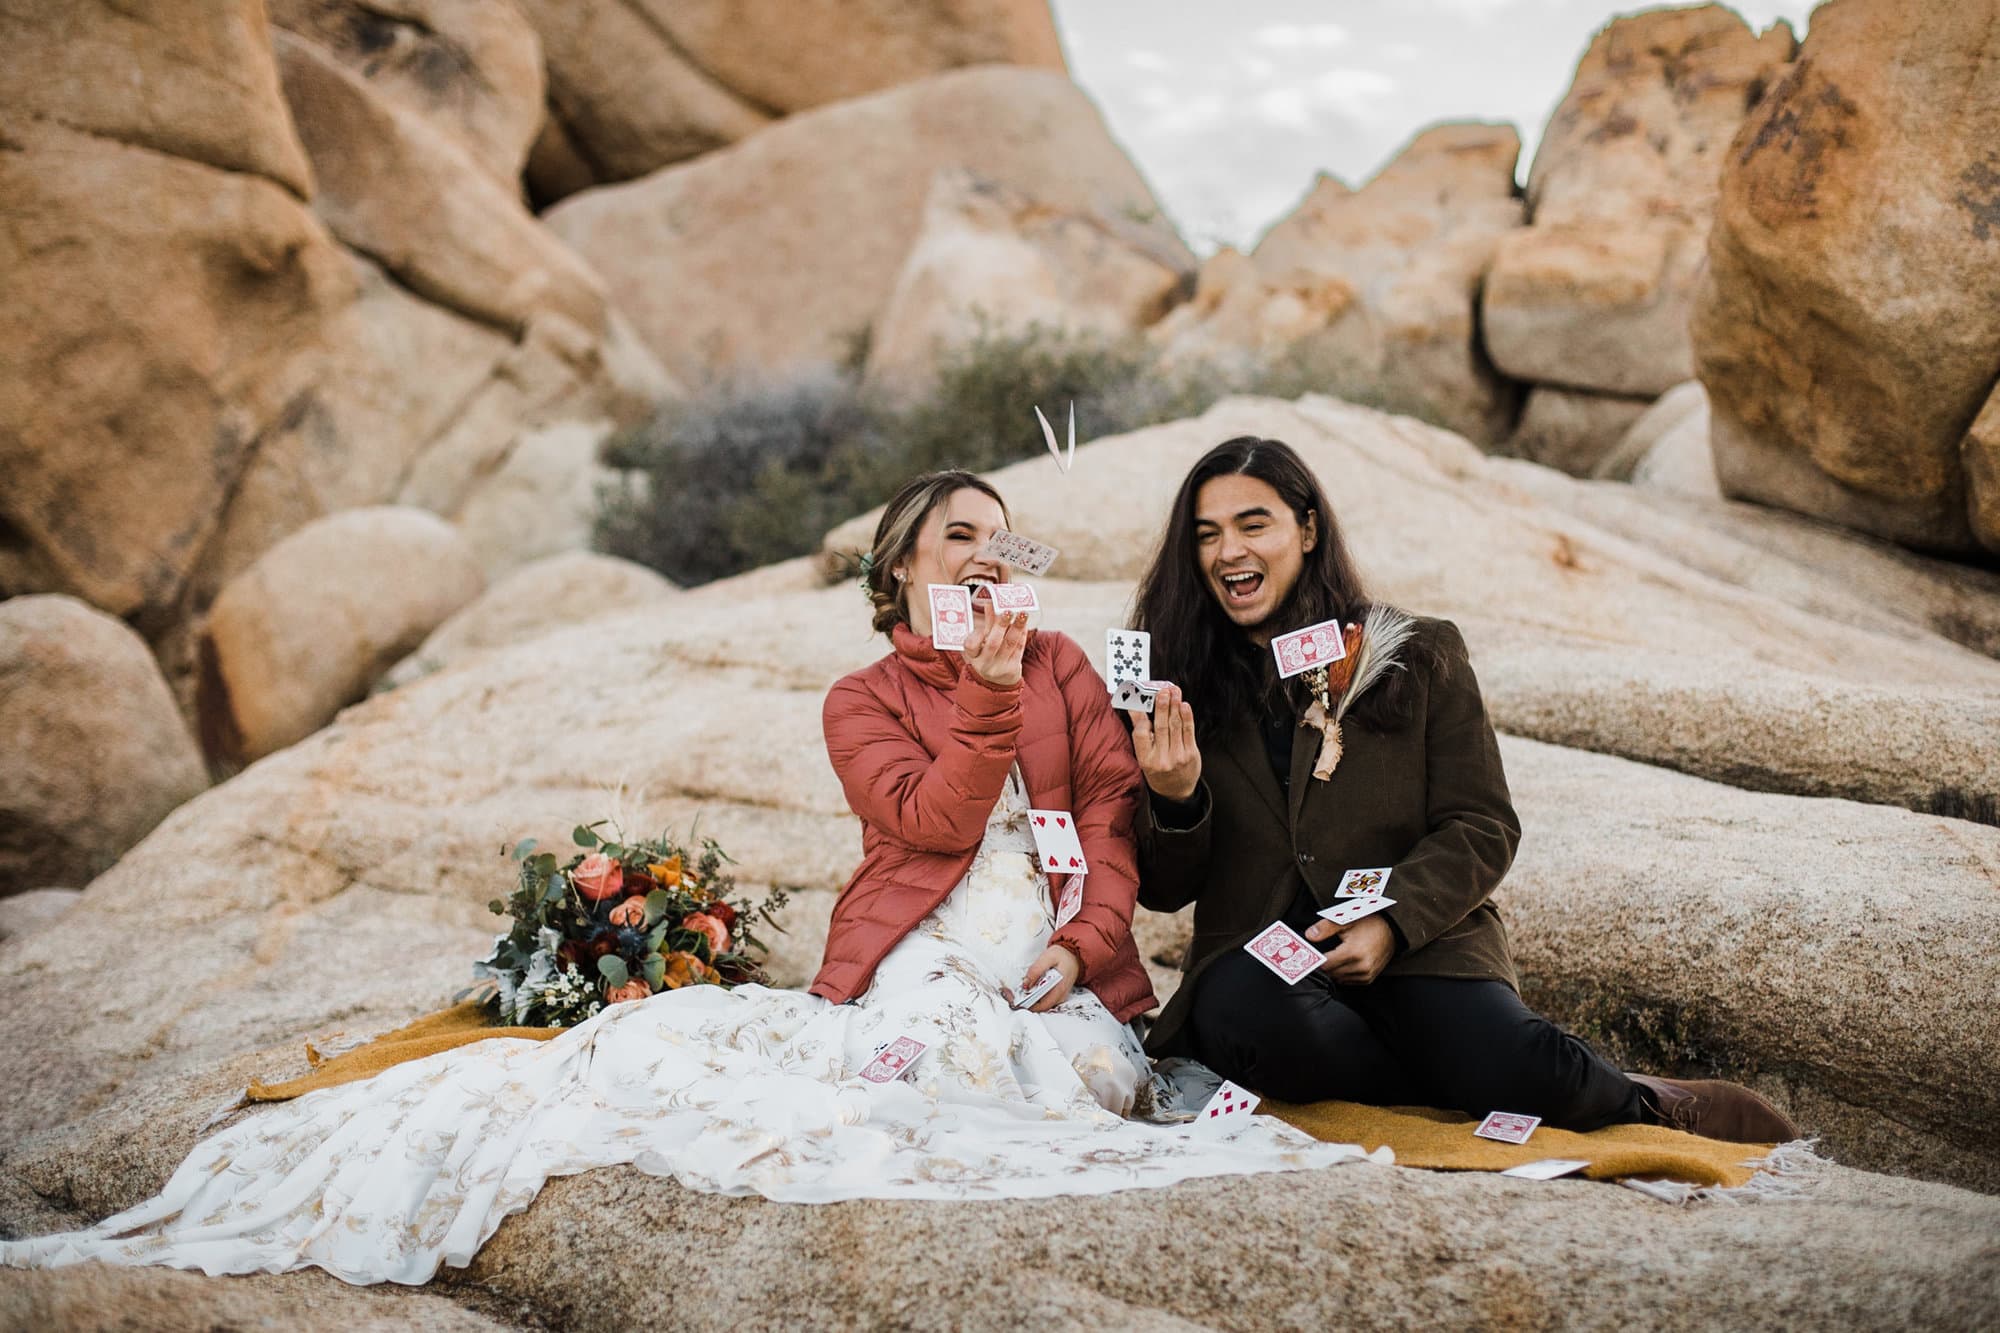 If you're planning an elopement in Joshua Tree National Park, then this is the guide is made for you. Everything you need to know about planning a desert elopement can be found here.